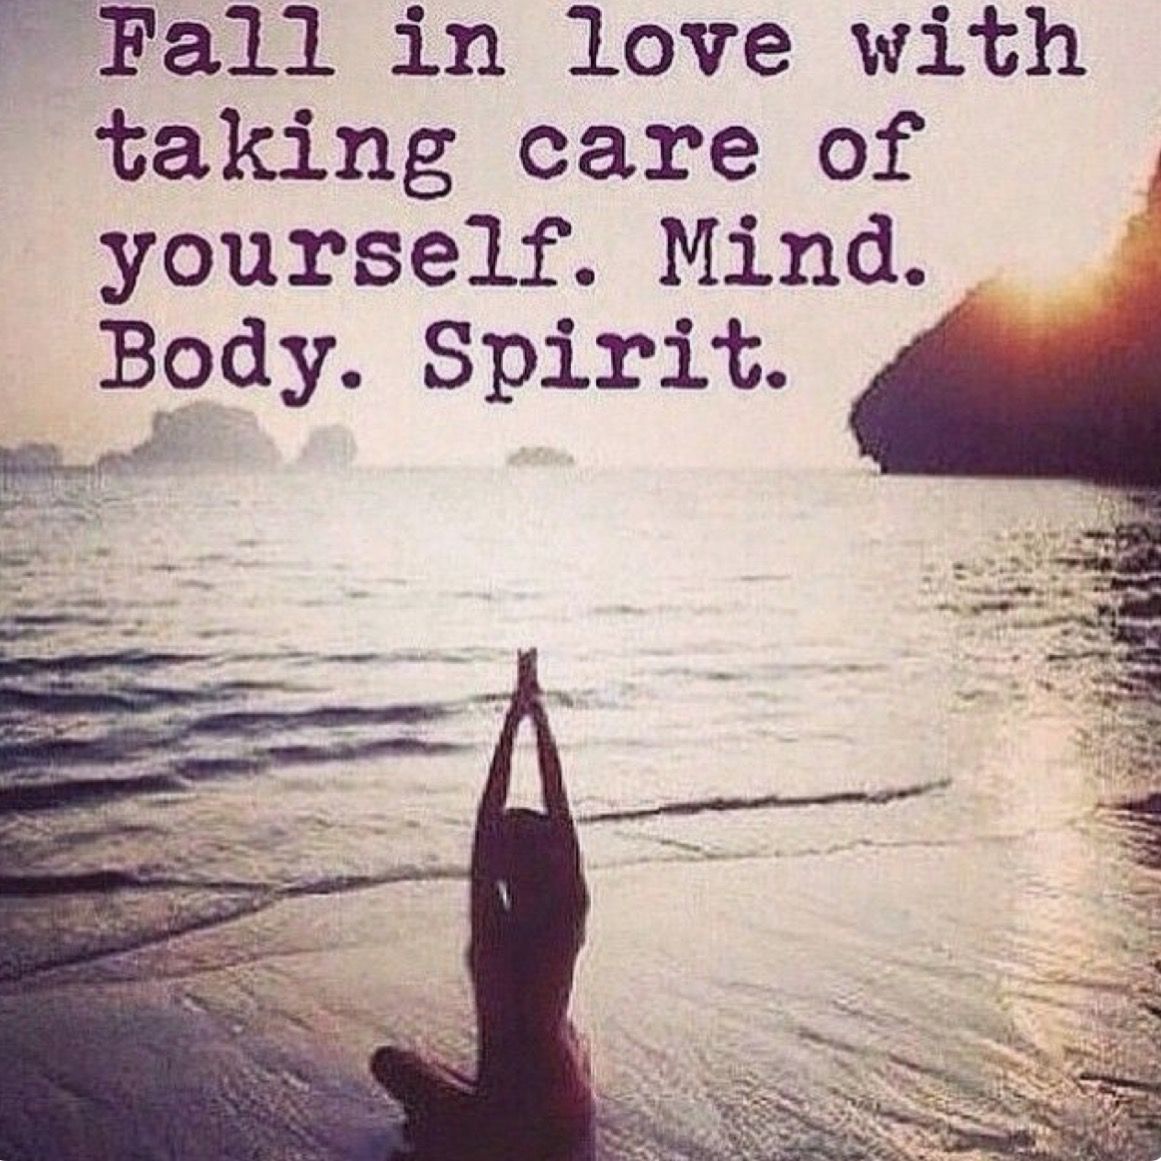 fall in love with taking care of yourself. mind, body, spirit